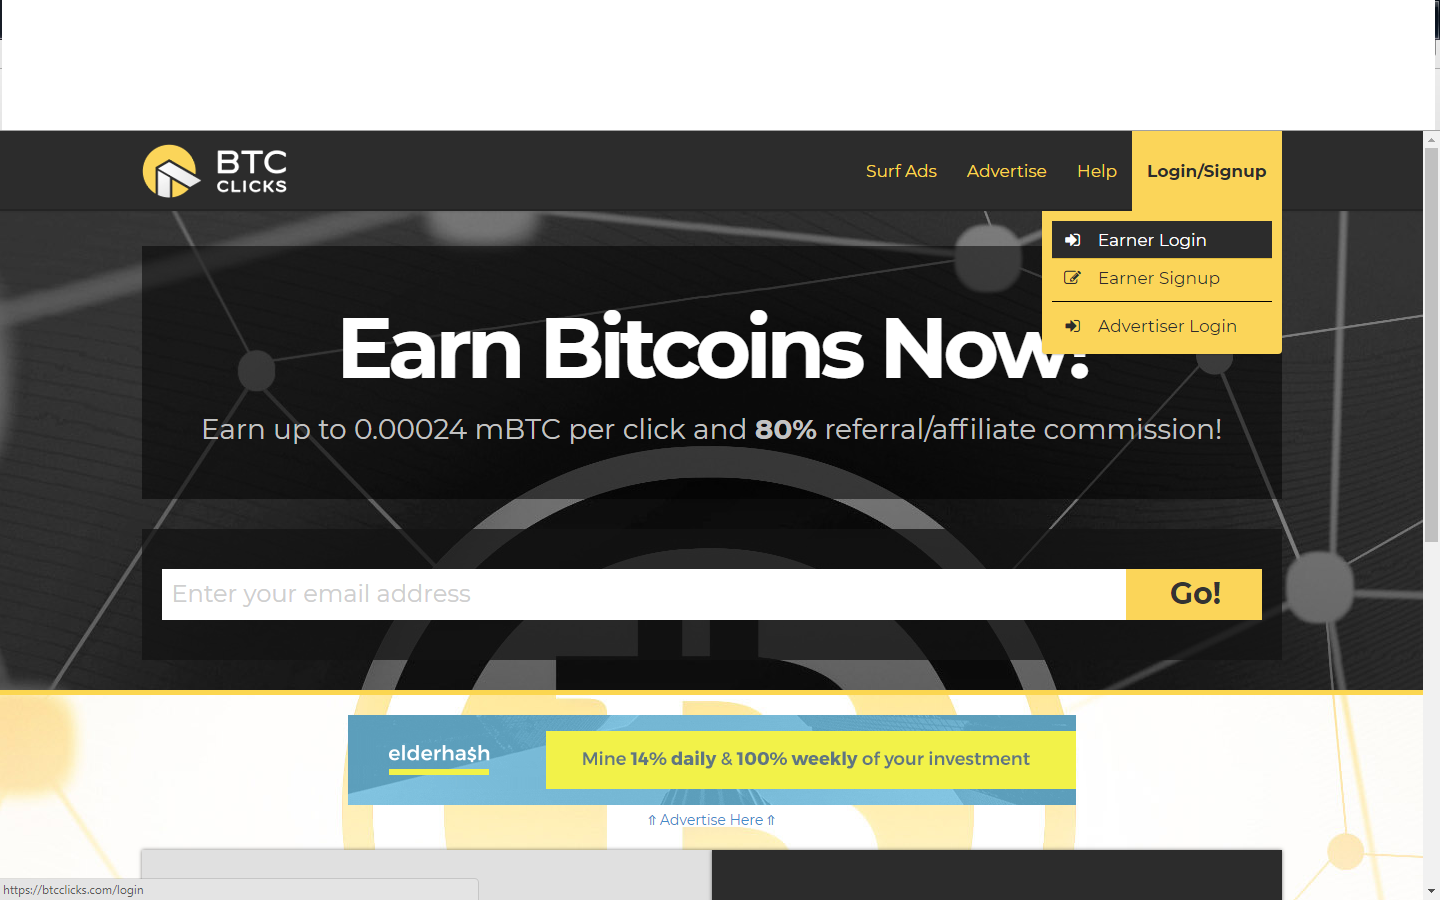 How To Earn Bitcoins Every Day By Watching Ads In Btc Clicks Steemi!   t - 